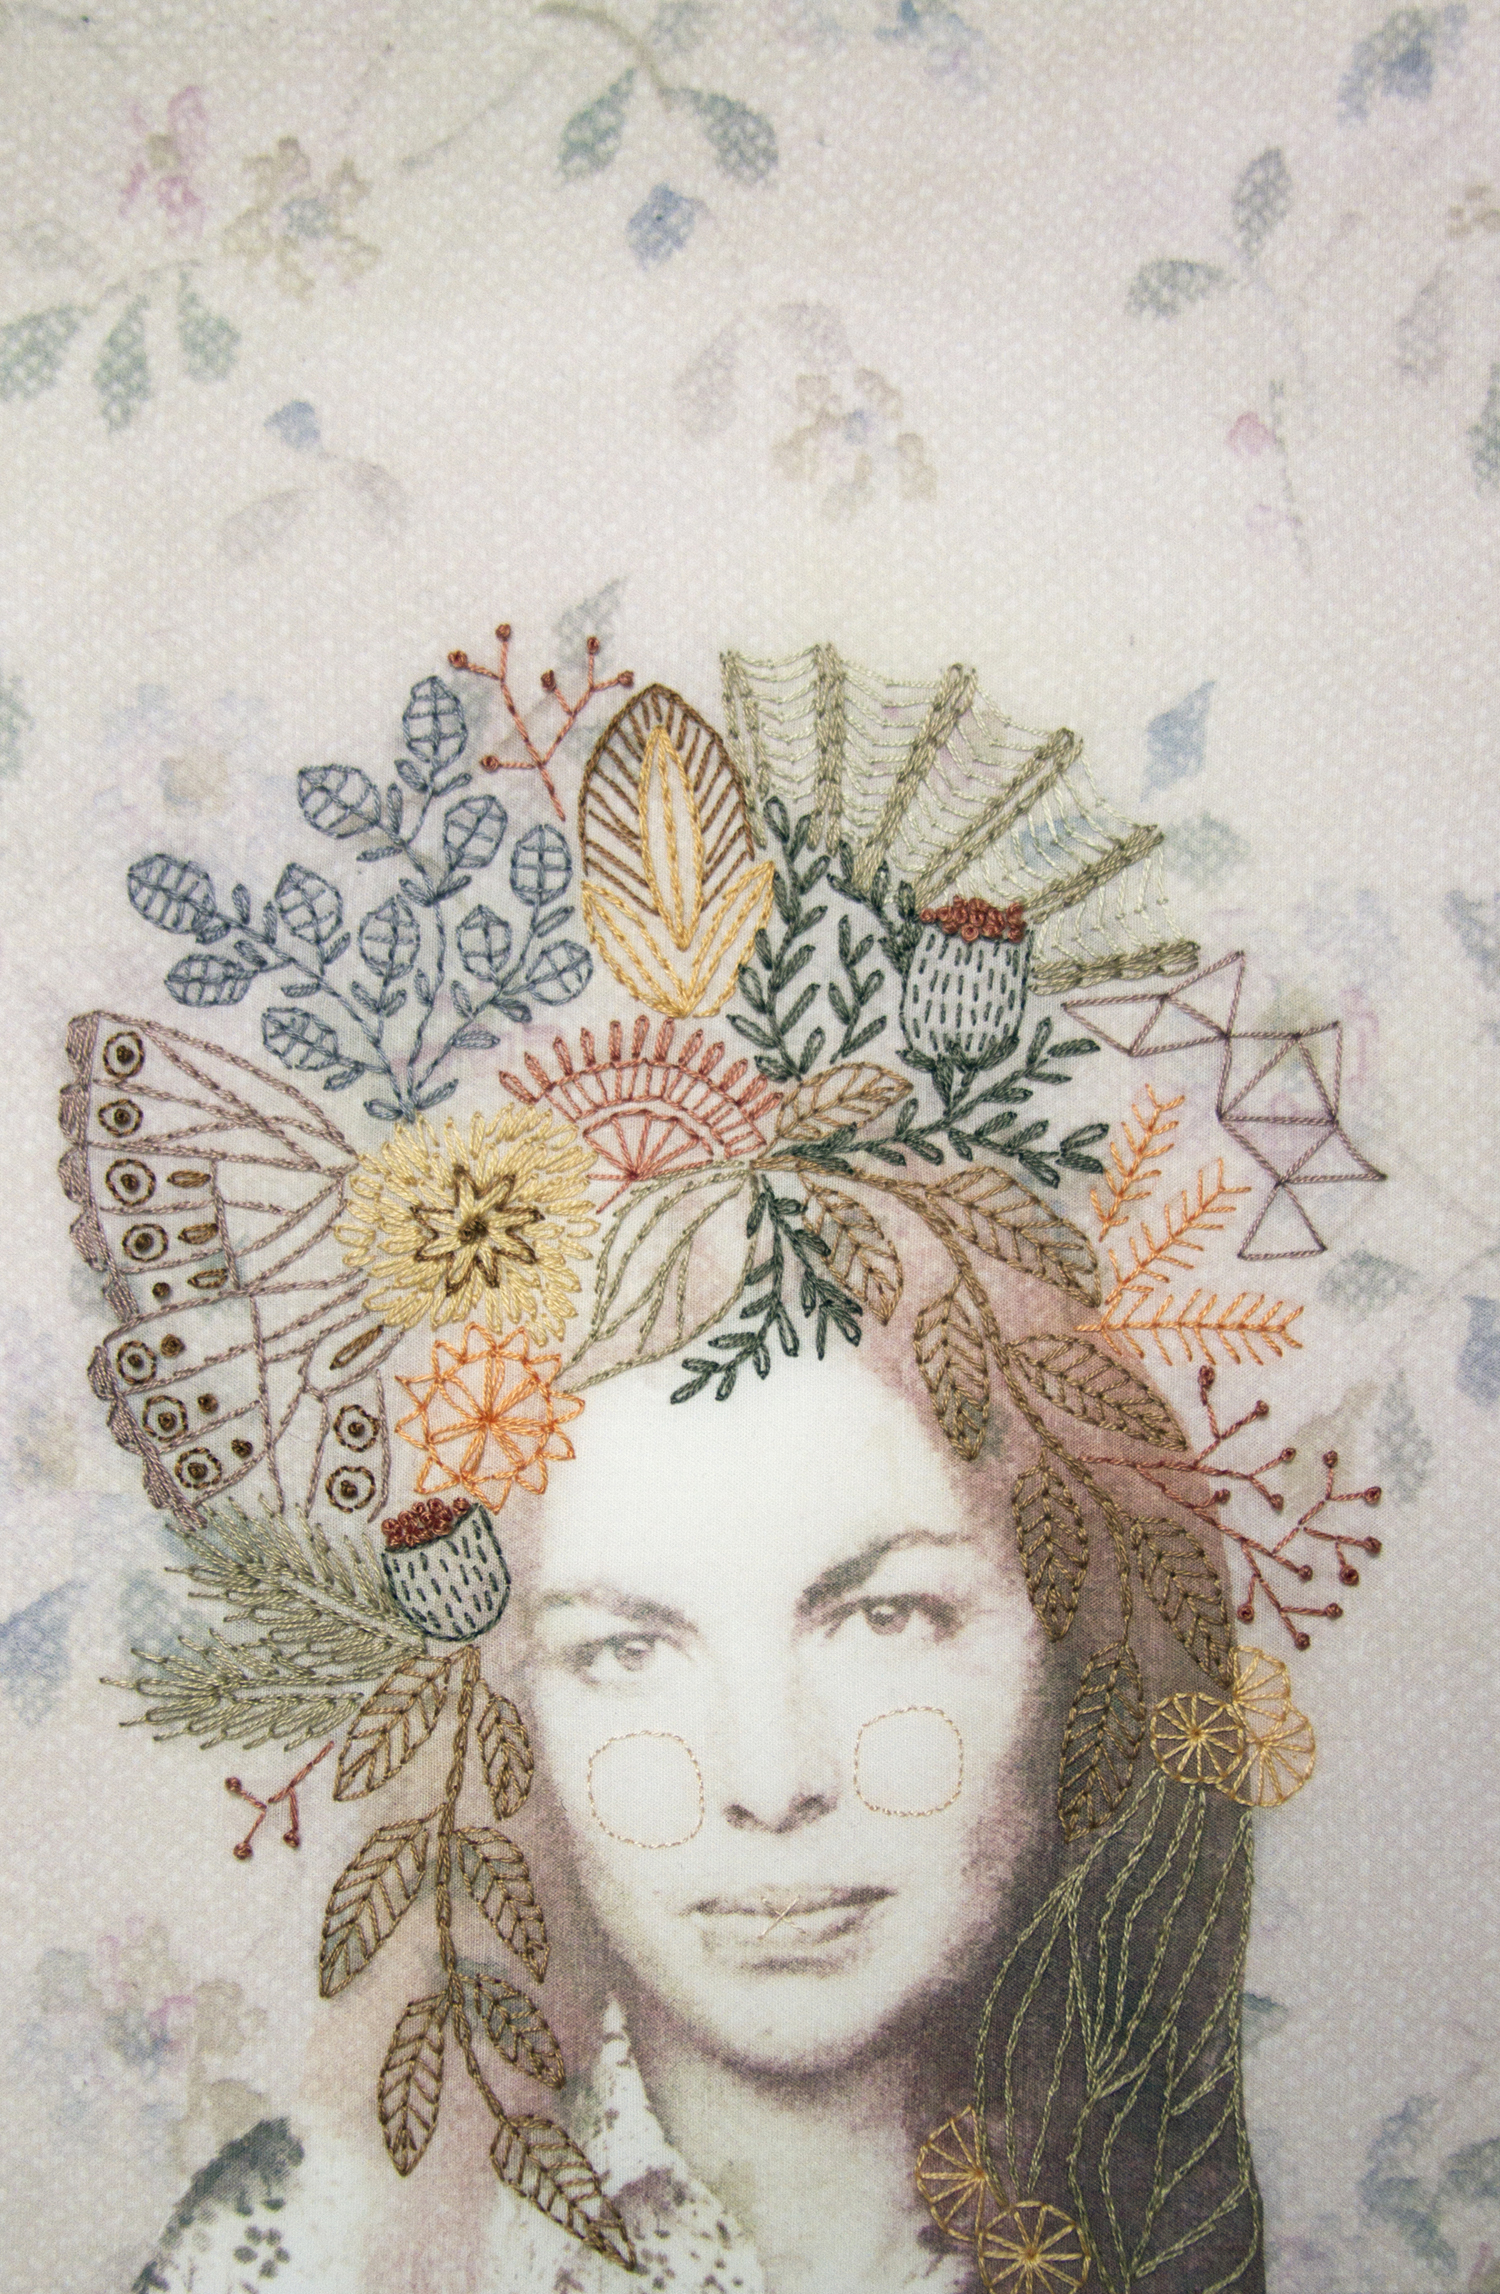  Chelsea Revelle,  Audra , fabric, inkjet dye and embroidery floss, 11" x 17" 